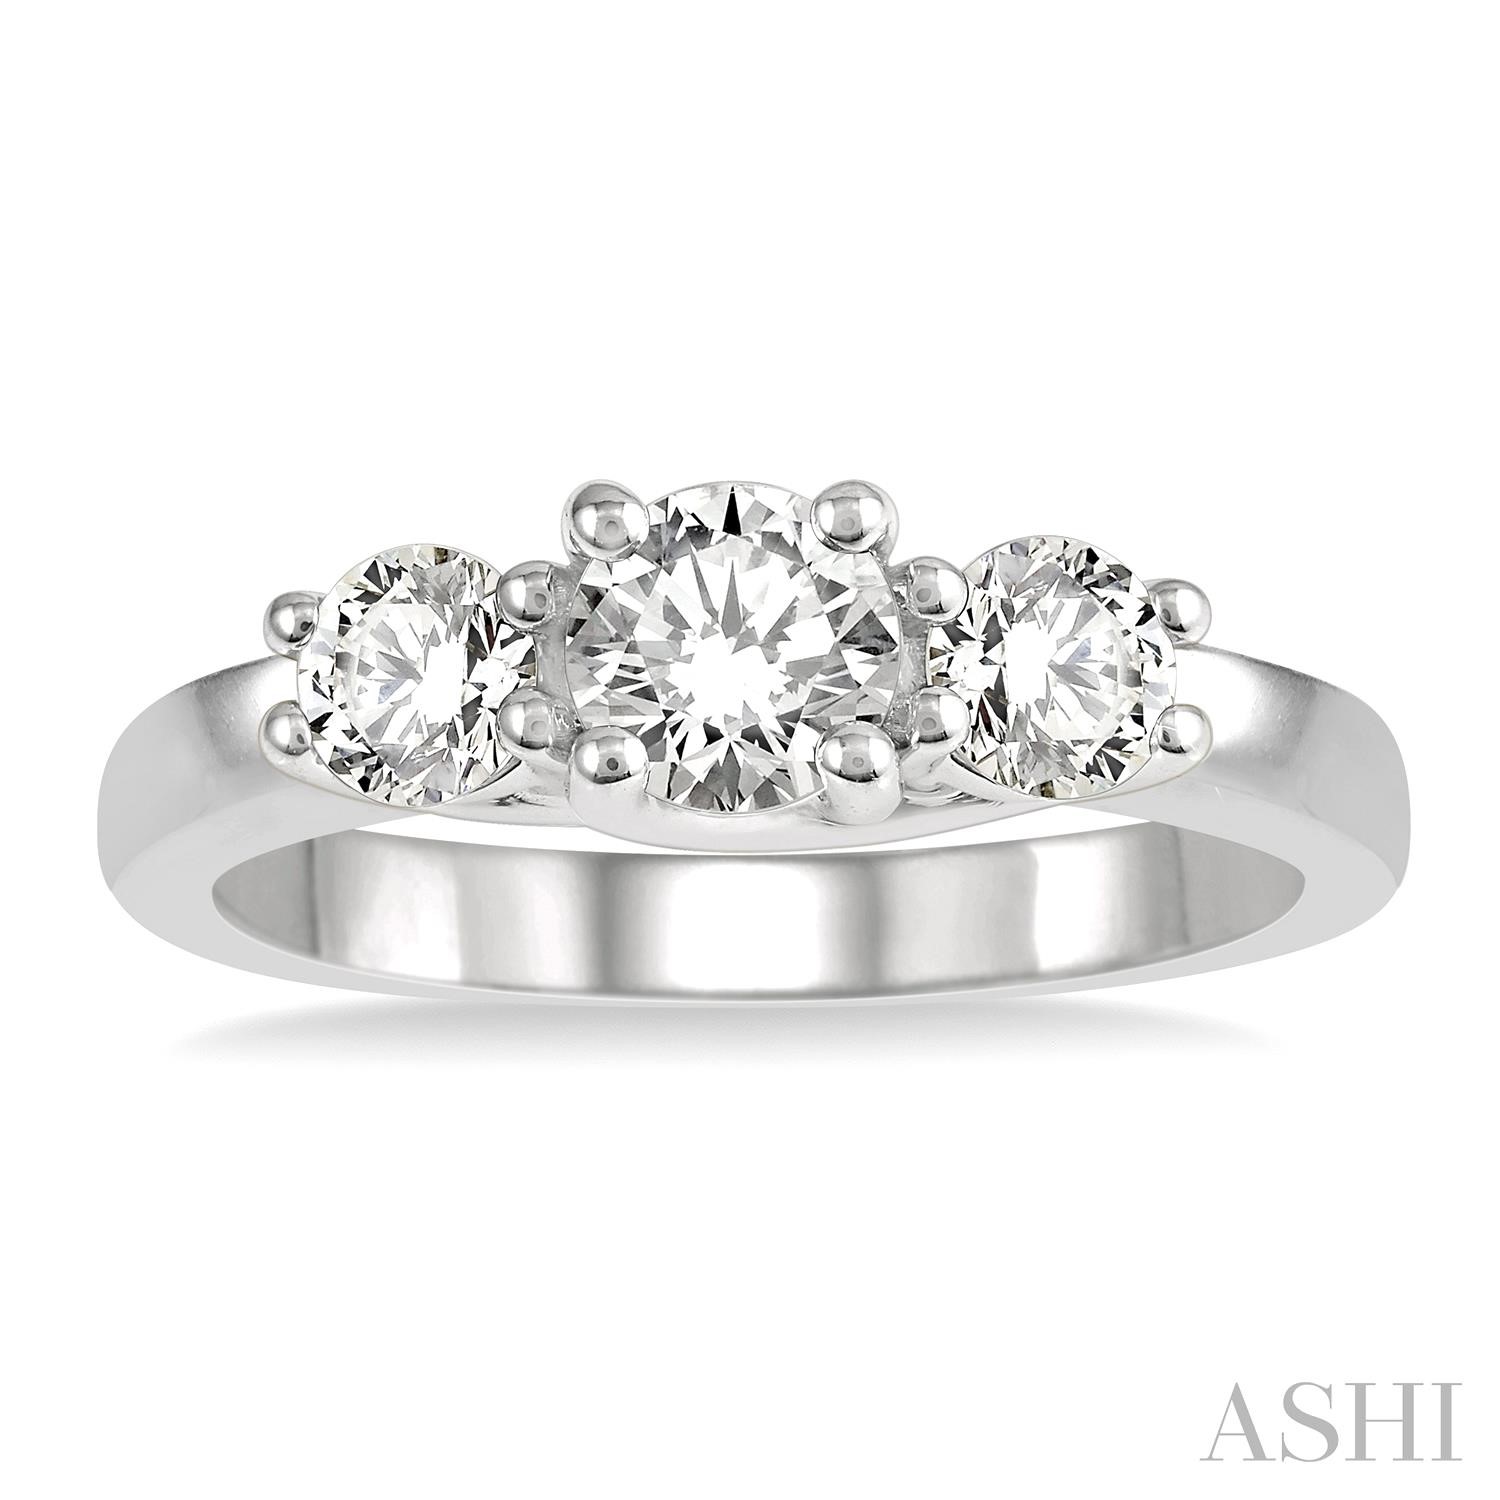 14K WHITE GOLD 3 STONE DIAMOND RING SIZE 6.5 WITH ONE 0.50CT ROUND I-J SI3-I1 DIAMOND AND 2=0.50TW ROUND I-J SI3-I1 DIAMONDS